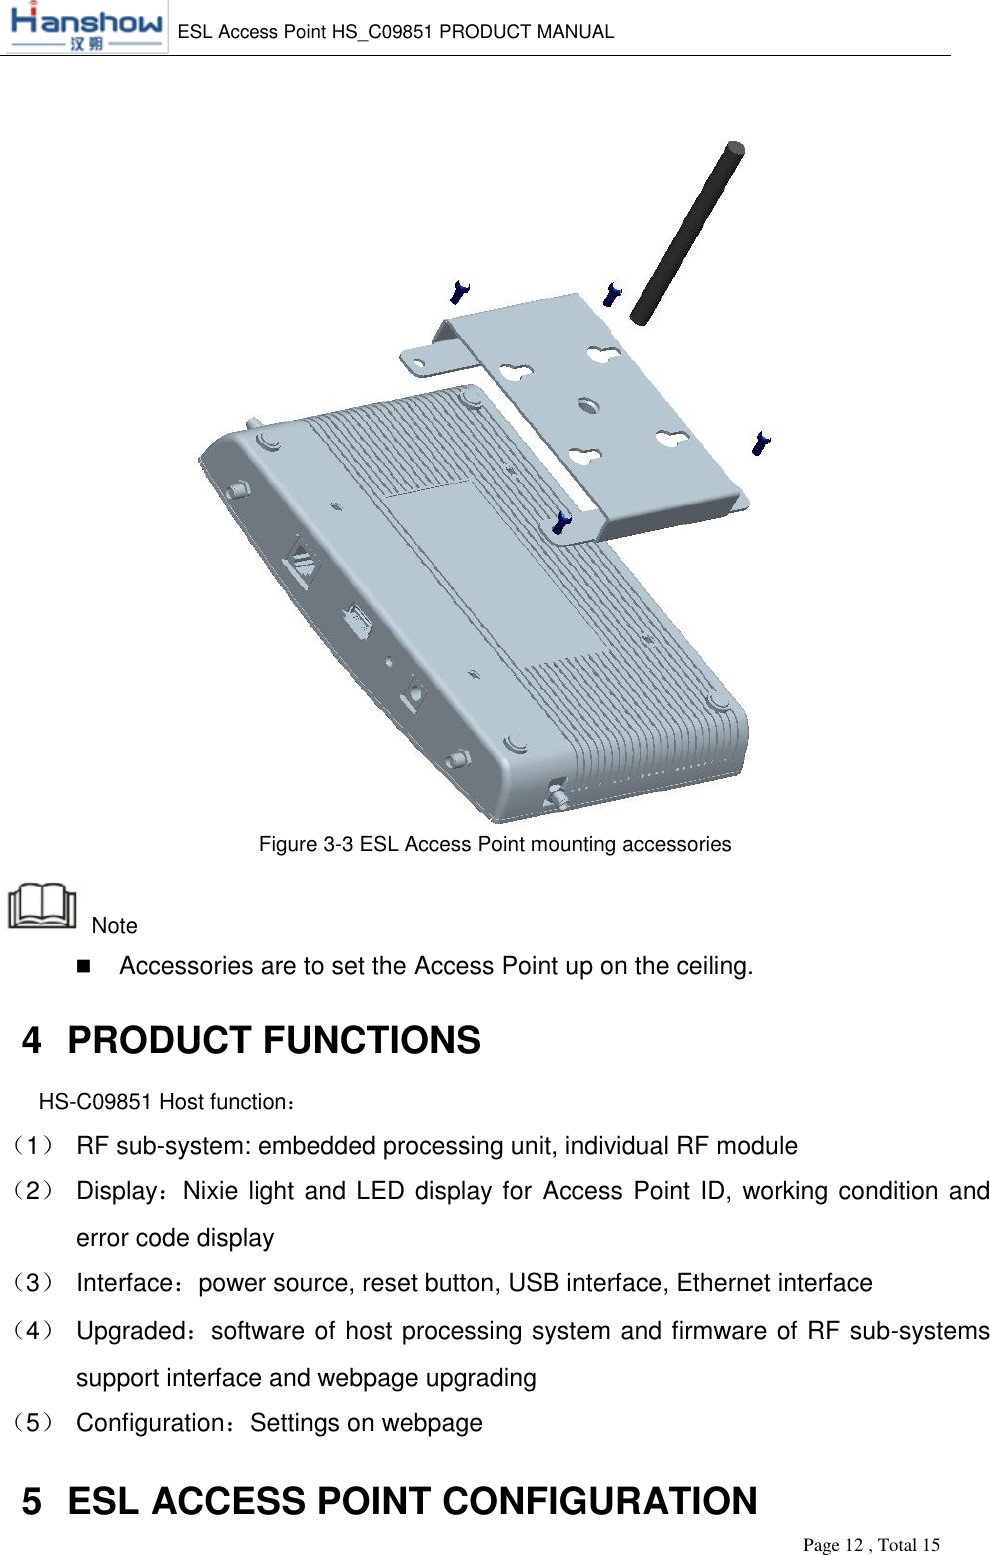    ESL Access Point HS_C09851 PRODUCT MANUAL          Page 12 , Total 15        Figure 3-3 ESL Access Point mounting accessories  Note  Accessories are to set the Access Point up on the ceiling. 4  PRODUCT FUNCTIONS HS-C09851 Host function： （1） RF sub-system: embedded processing unit, individual RF module （2） Display：Nixie light and LED display for Access Point ID, working condition and error code display （3） Interface：power source, reset button, USB interface, Ethernet interface （4） Upgraded：software of host processing system and firmware of RF sub-systems support interface and webpage upgrading （5） Configuration：Settings on webpage 5  ESL ACCESS POINT CONFIGURATION 